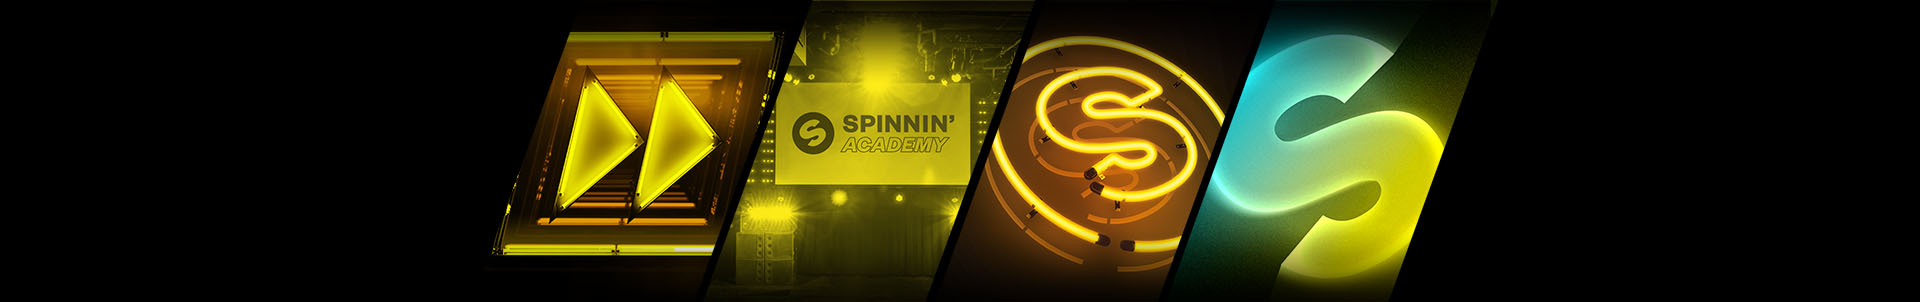 ADE 2017: Welcome to Club Spinnin'